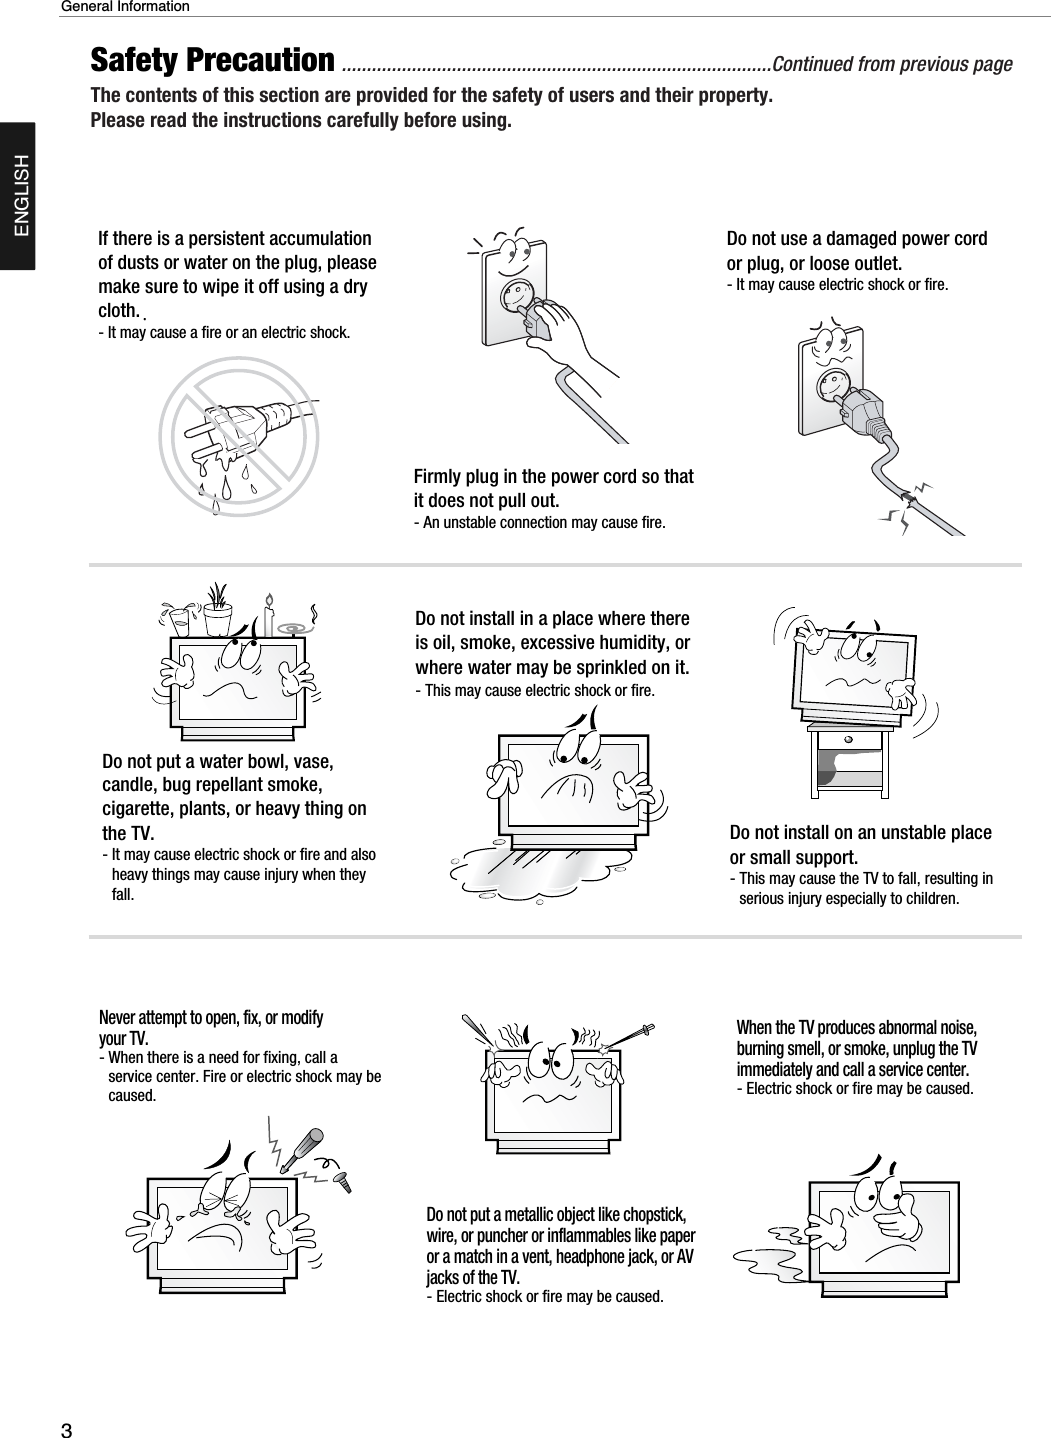 3General InformationENGLISHSafety Precaution ......................................................................................Continued from previous pageThe contents of this section are provided for the safety of users and their property.Please read the instructions carefully before using.If there is a persistent accumulationof dusts or water on the plug, pleasemake sure to wipe it off using a drycloth.- It may cause a fire or an electric shock.Firmly plug in the power cord so thatit does not pull out.- An unstable connection may cause fire.Do not use a damaged power cordor plug, or loose outlet.- It may cause electric shock or fire.Do not put a water bowl, vase,candle, bug repellant smoke,cigarette, plants, or heavy thing onthe TV.- It may cause electric shock or fire and alsoheavy things may cause injury when theyfall.Do not install in a place where thereis oil, smoke, excessive humidity, orwhere water may be sprinkled on it.- This may cause electric shock or fire.Do not install on an unstable placeor small support.- This may cause the TV to fall, resulting inserious injury especially to children.Never attempt to open, fix, or modifyyour TV.- When there is a need for fixing, call aservice center. Fire or electric shock may becaused.Do not put a metallic object like chopstick,wire, or puncher or inflammables like paperor a match in a vent, headphone jack, or AVjacks of the TV.- Electric shock or fire may be caused.When the TV produces abnormal noise,burning smell, or smoke, unplug the TVimmediately and call a service center.- Electric shock or fire may be caused.